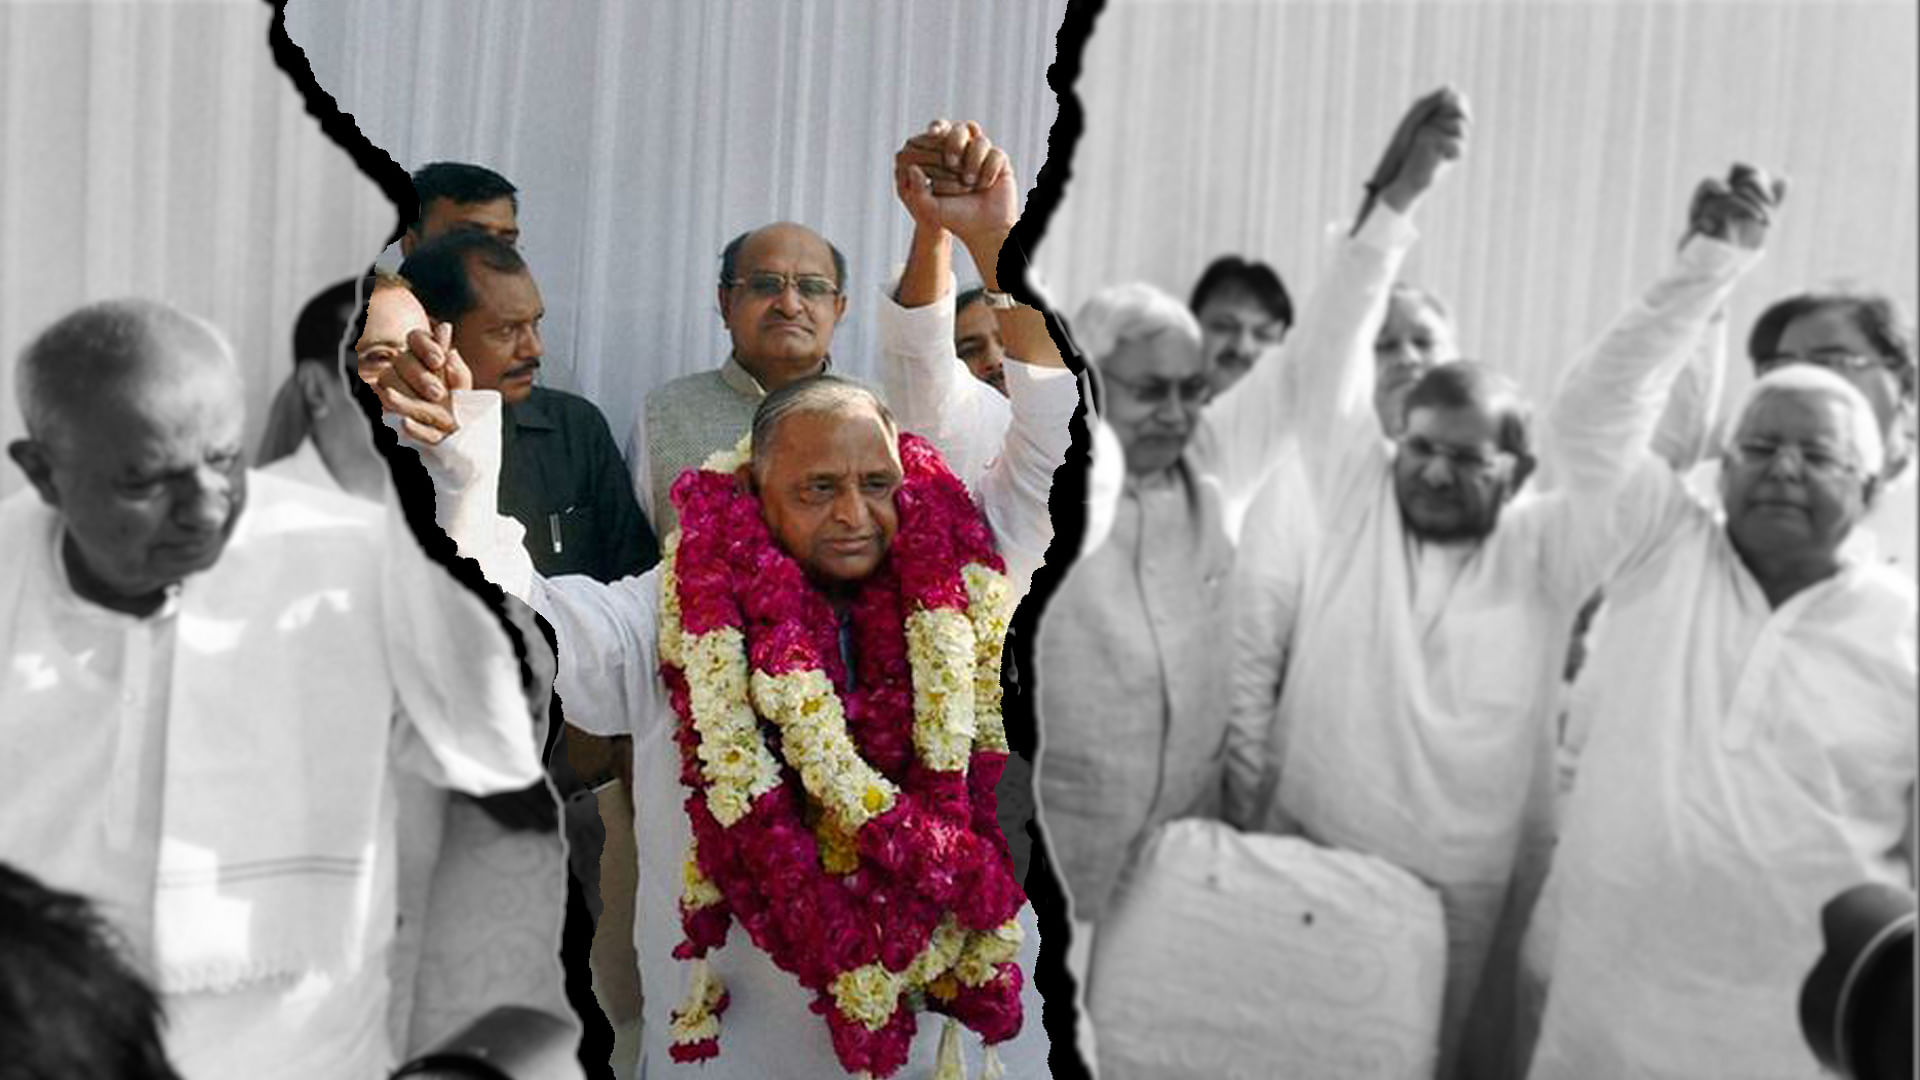 Mulayam Singh (centre) has decided to exit the Janata Parivar and fight the Bihar polls on his own. (Photo: PTI)